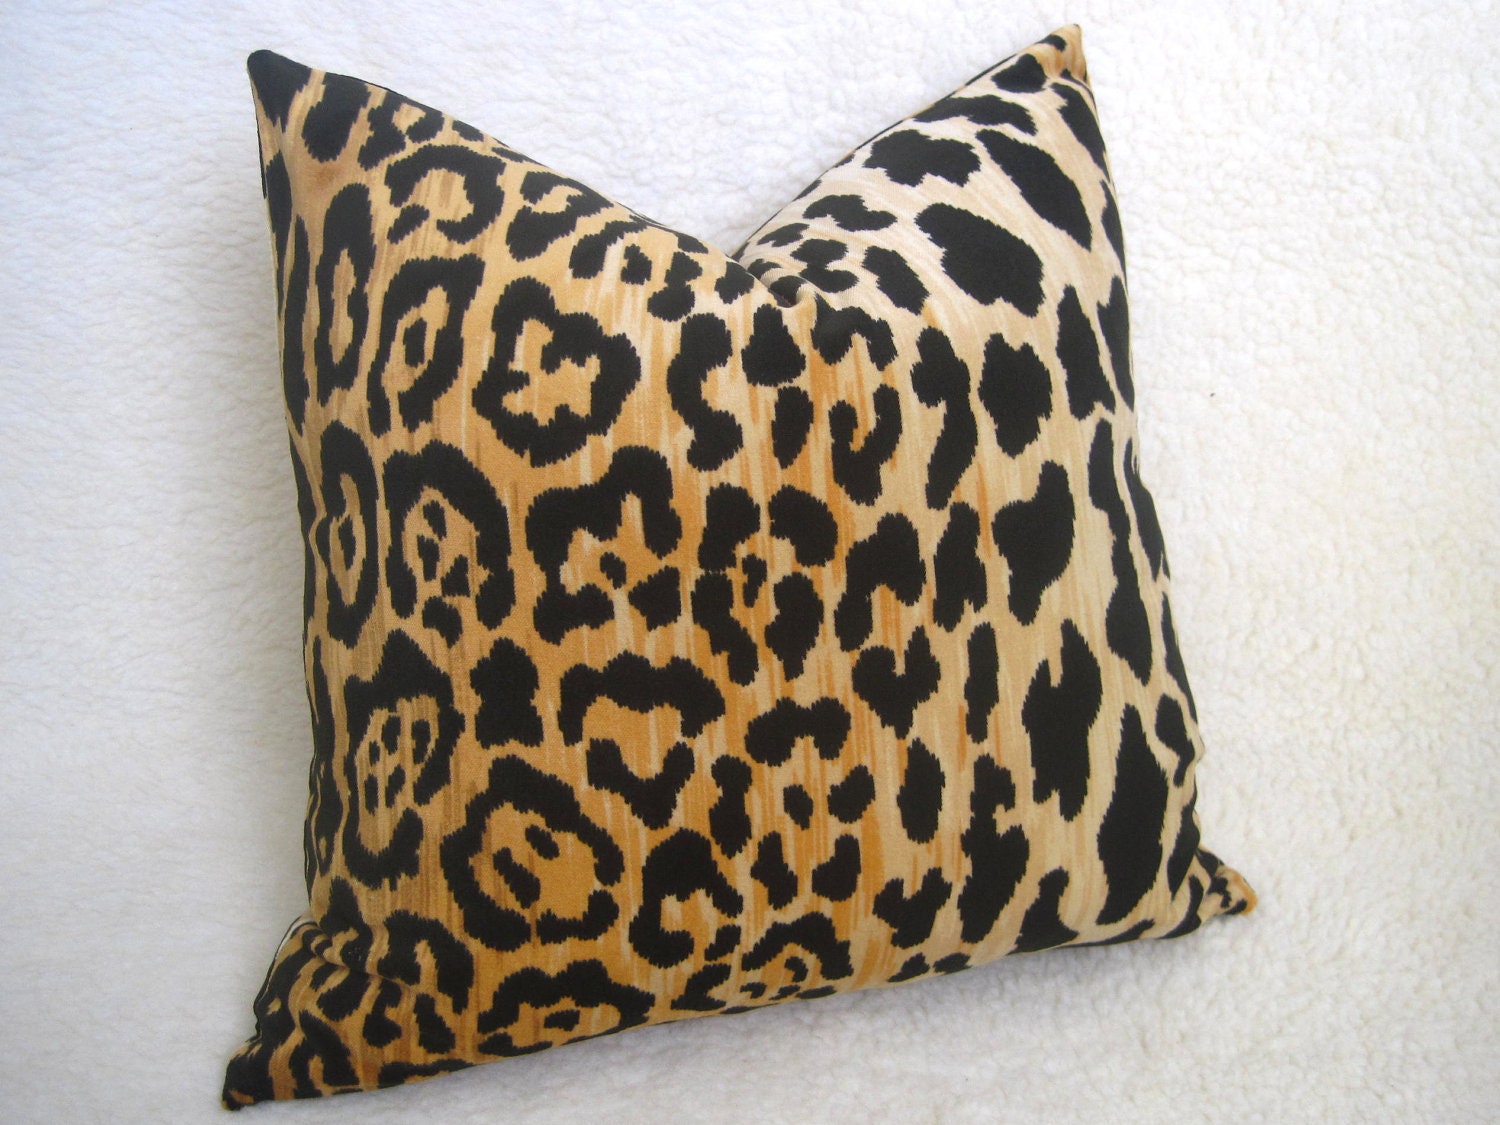  Yangest 20x20 Inch Leopard Decorative Velvet Throw Pillow Cover  Black and Gold Cheetah Cushion Case Modern Pillowcase for Sofa Couch  Bedroom Living Room Home Decor : Home & Kitchen